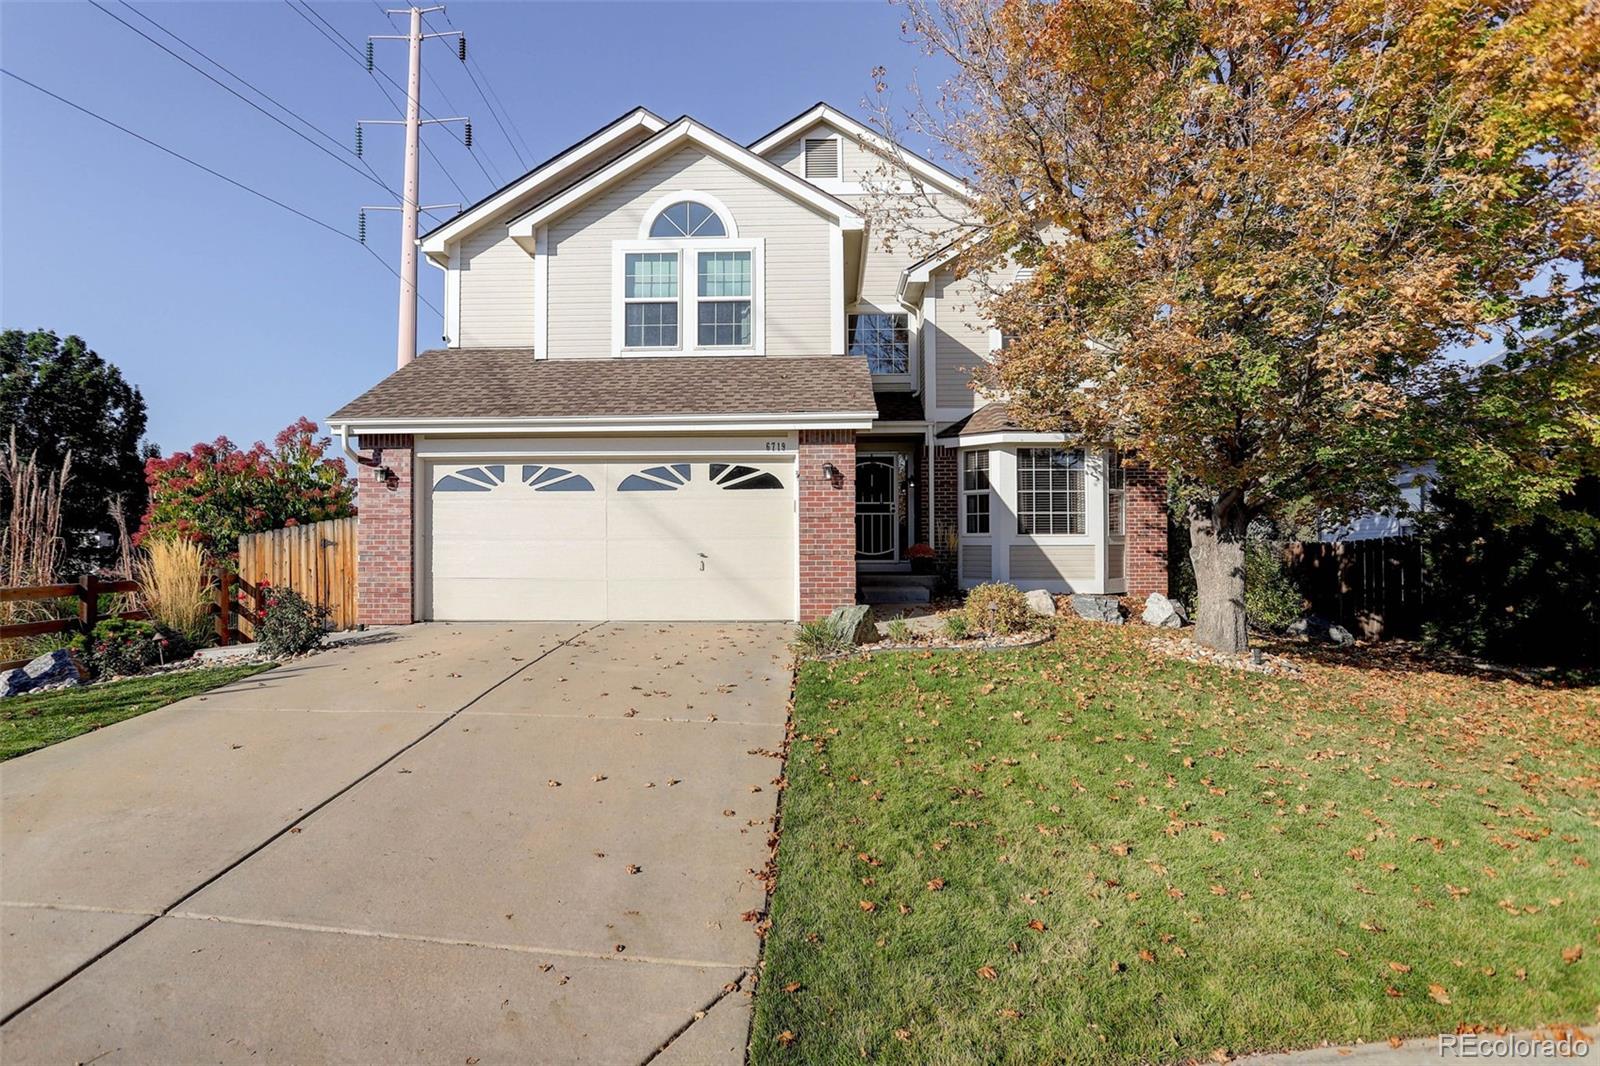 Report Image for 6719 W 97th Court,Westminster, Colorado